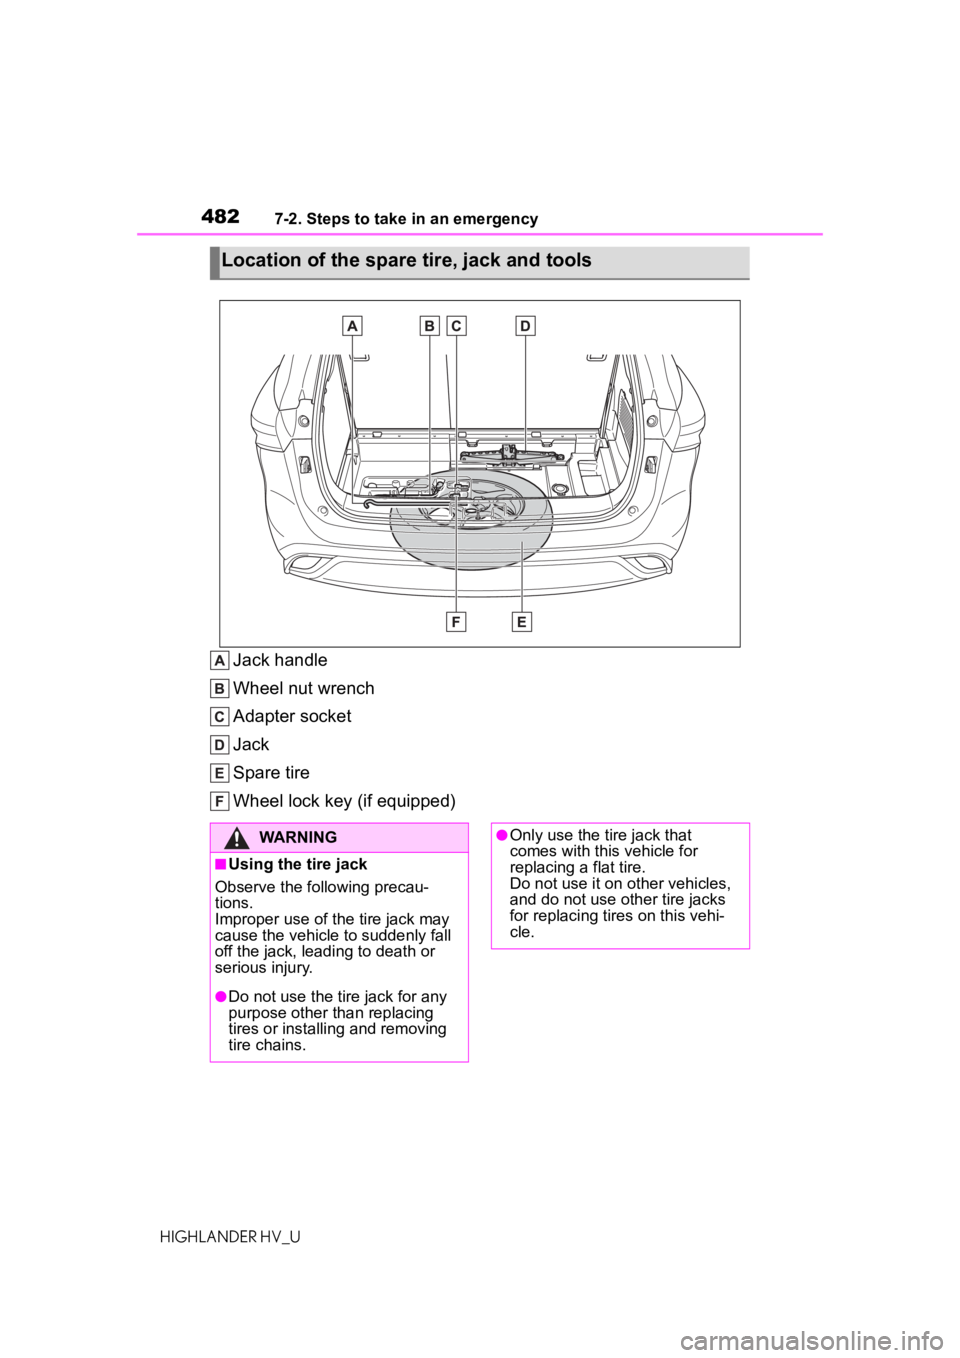 TOYOTA HIGHLANDER HYBRID 2021  Owners Manual (in English) 4827-2. Steps to take in an emergency
HIGHLANDER HV_U
Jack handle
Wheel nut wrench
Adapter socket
Jack
Spare tire
Wheel lock key (if equipped)
Location of the spare tire, jack and tools
WARNING
■Usi